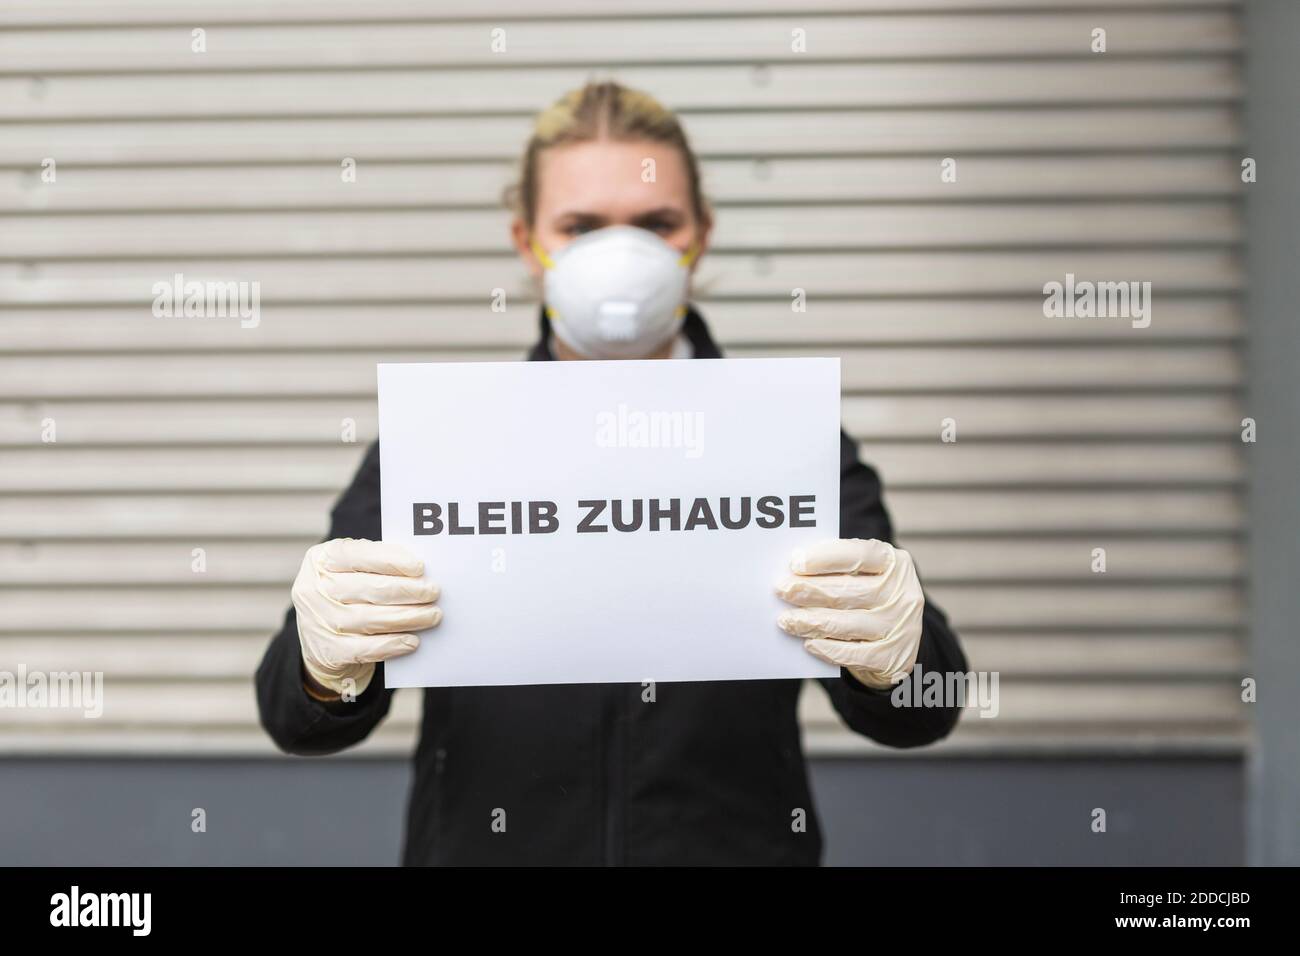 Teenage girl wearing protective mask and gloves holding sign with request 'Bleib Zuhause' Stock Photo